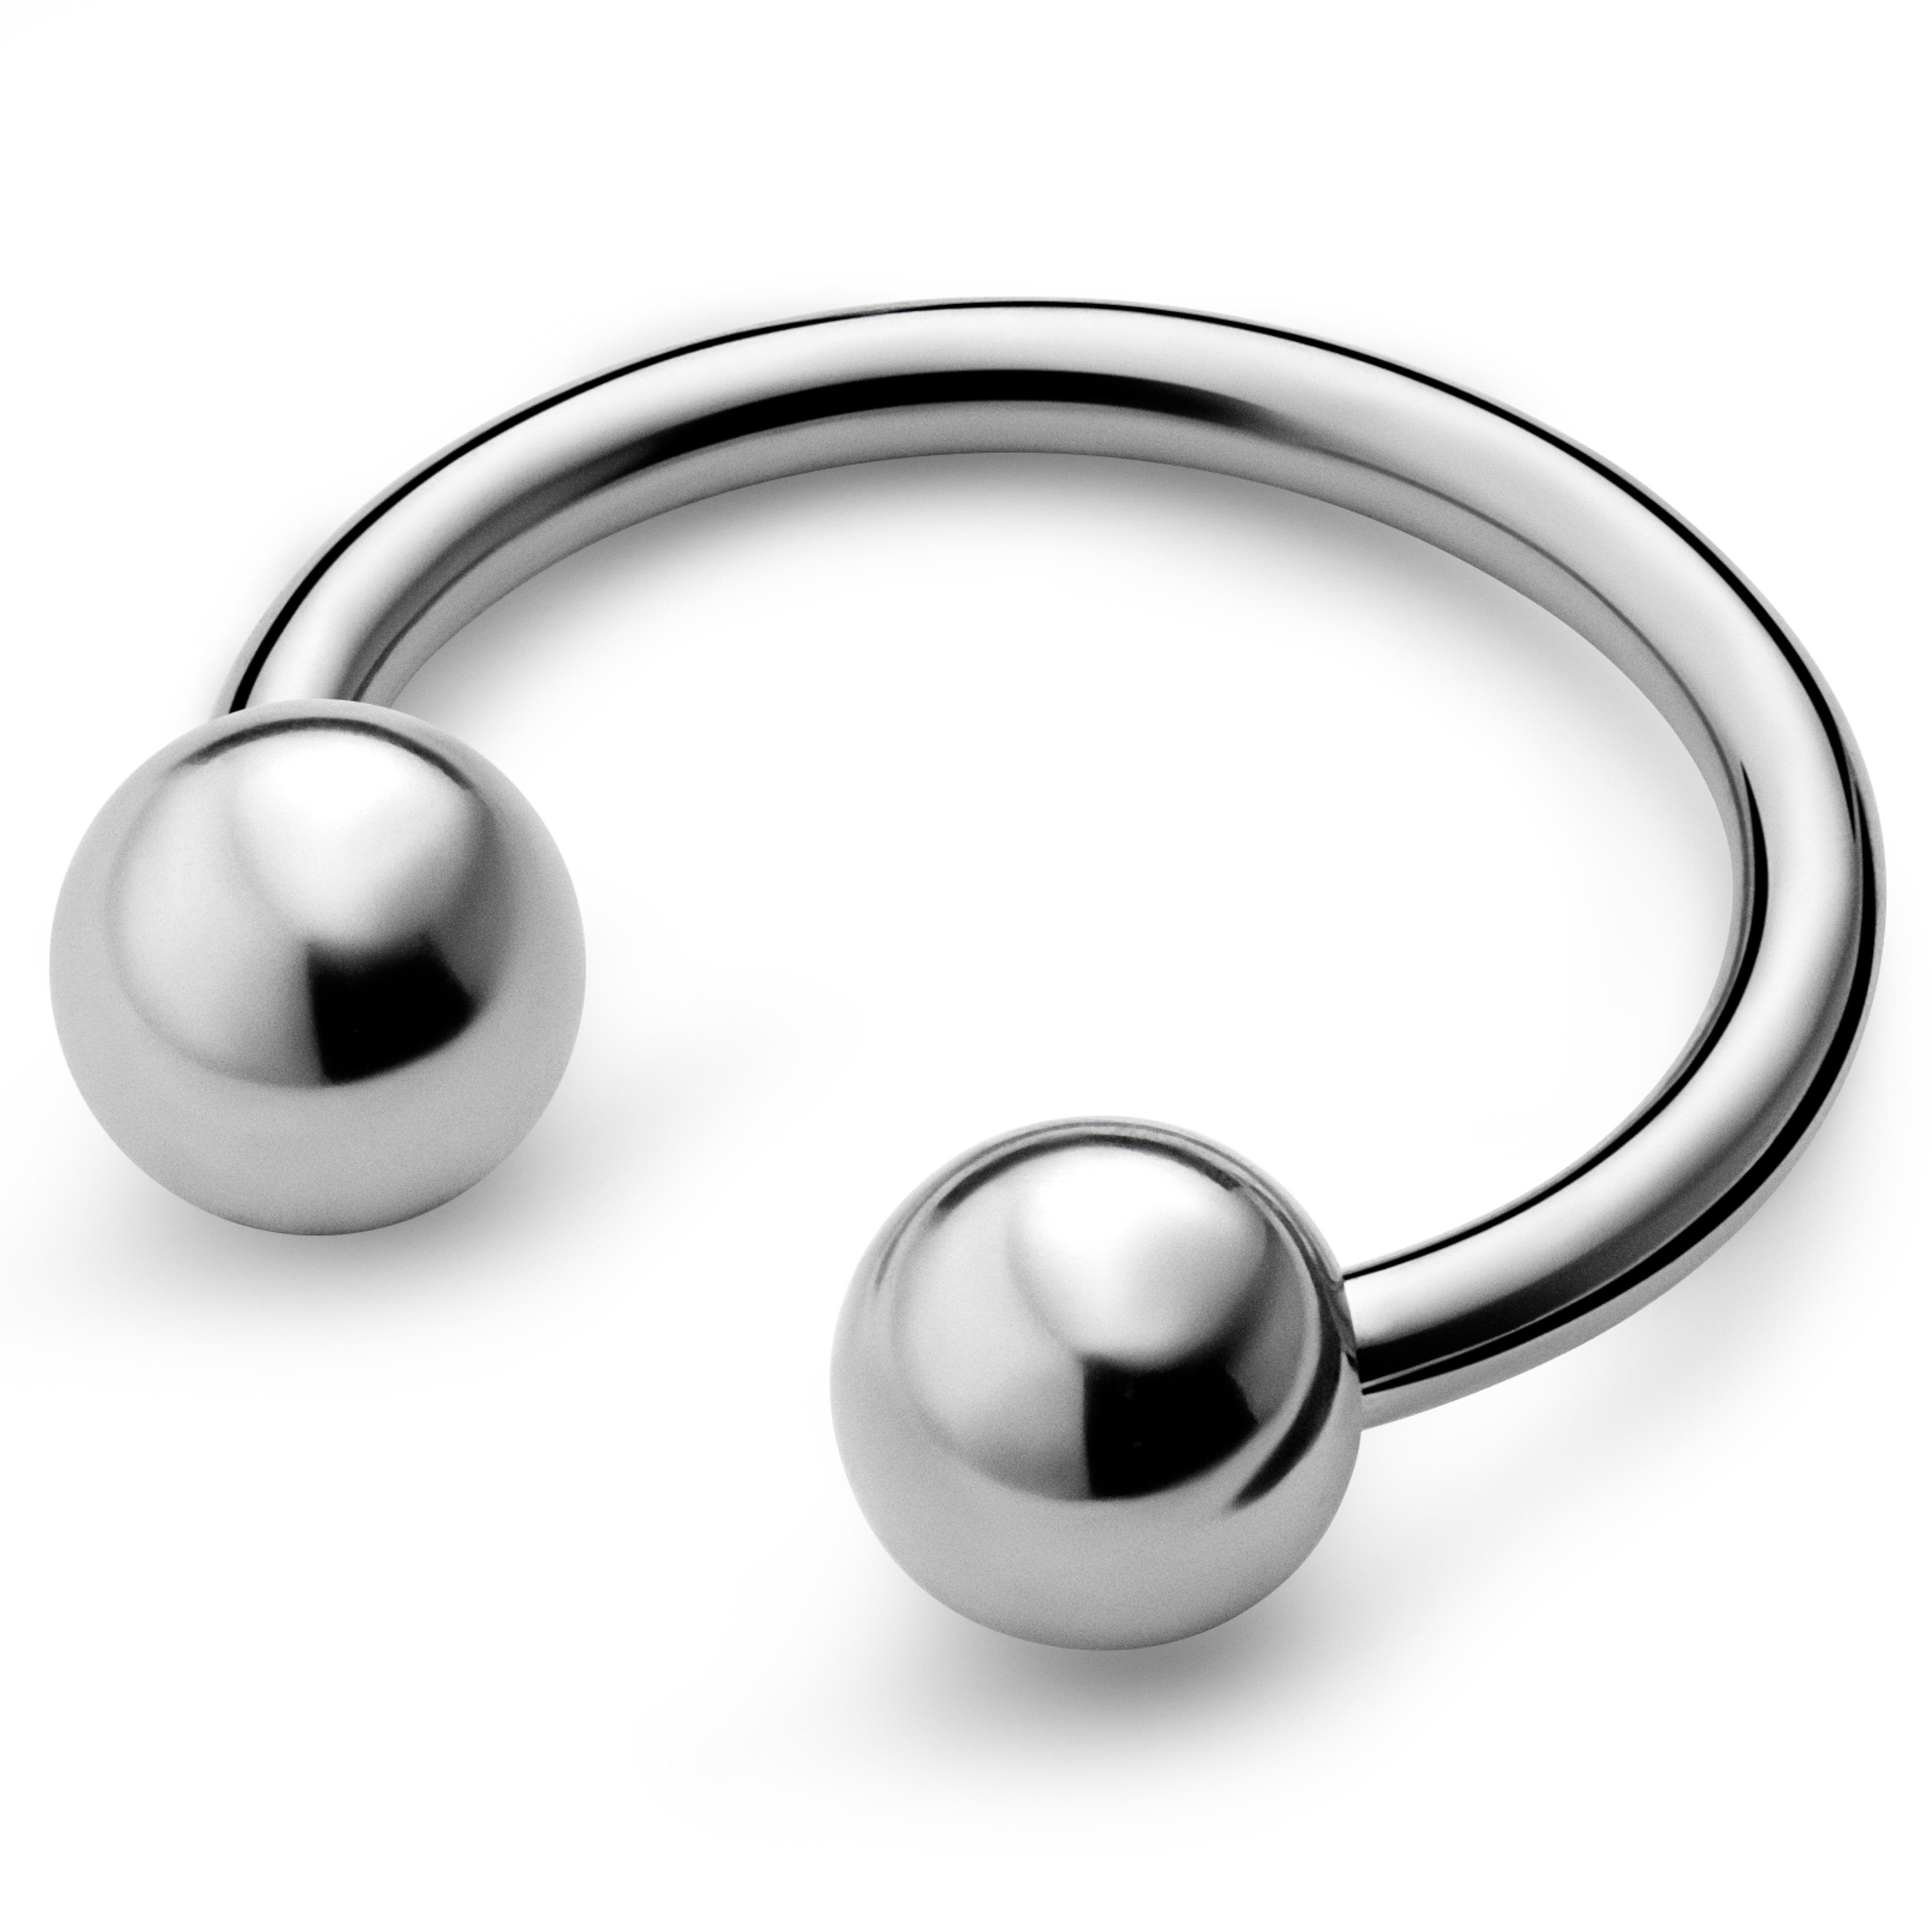 Small 1/3" (8 mm) Silver-Tone Surgical Steel Circular Barbell